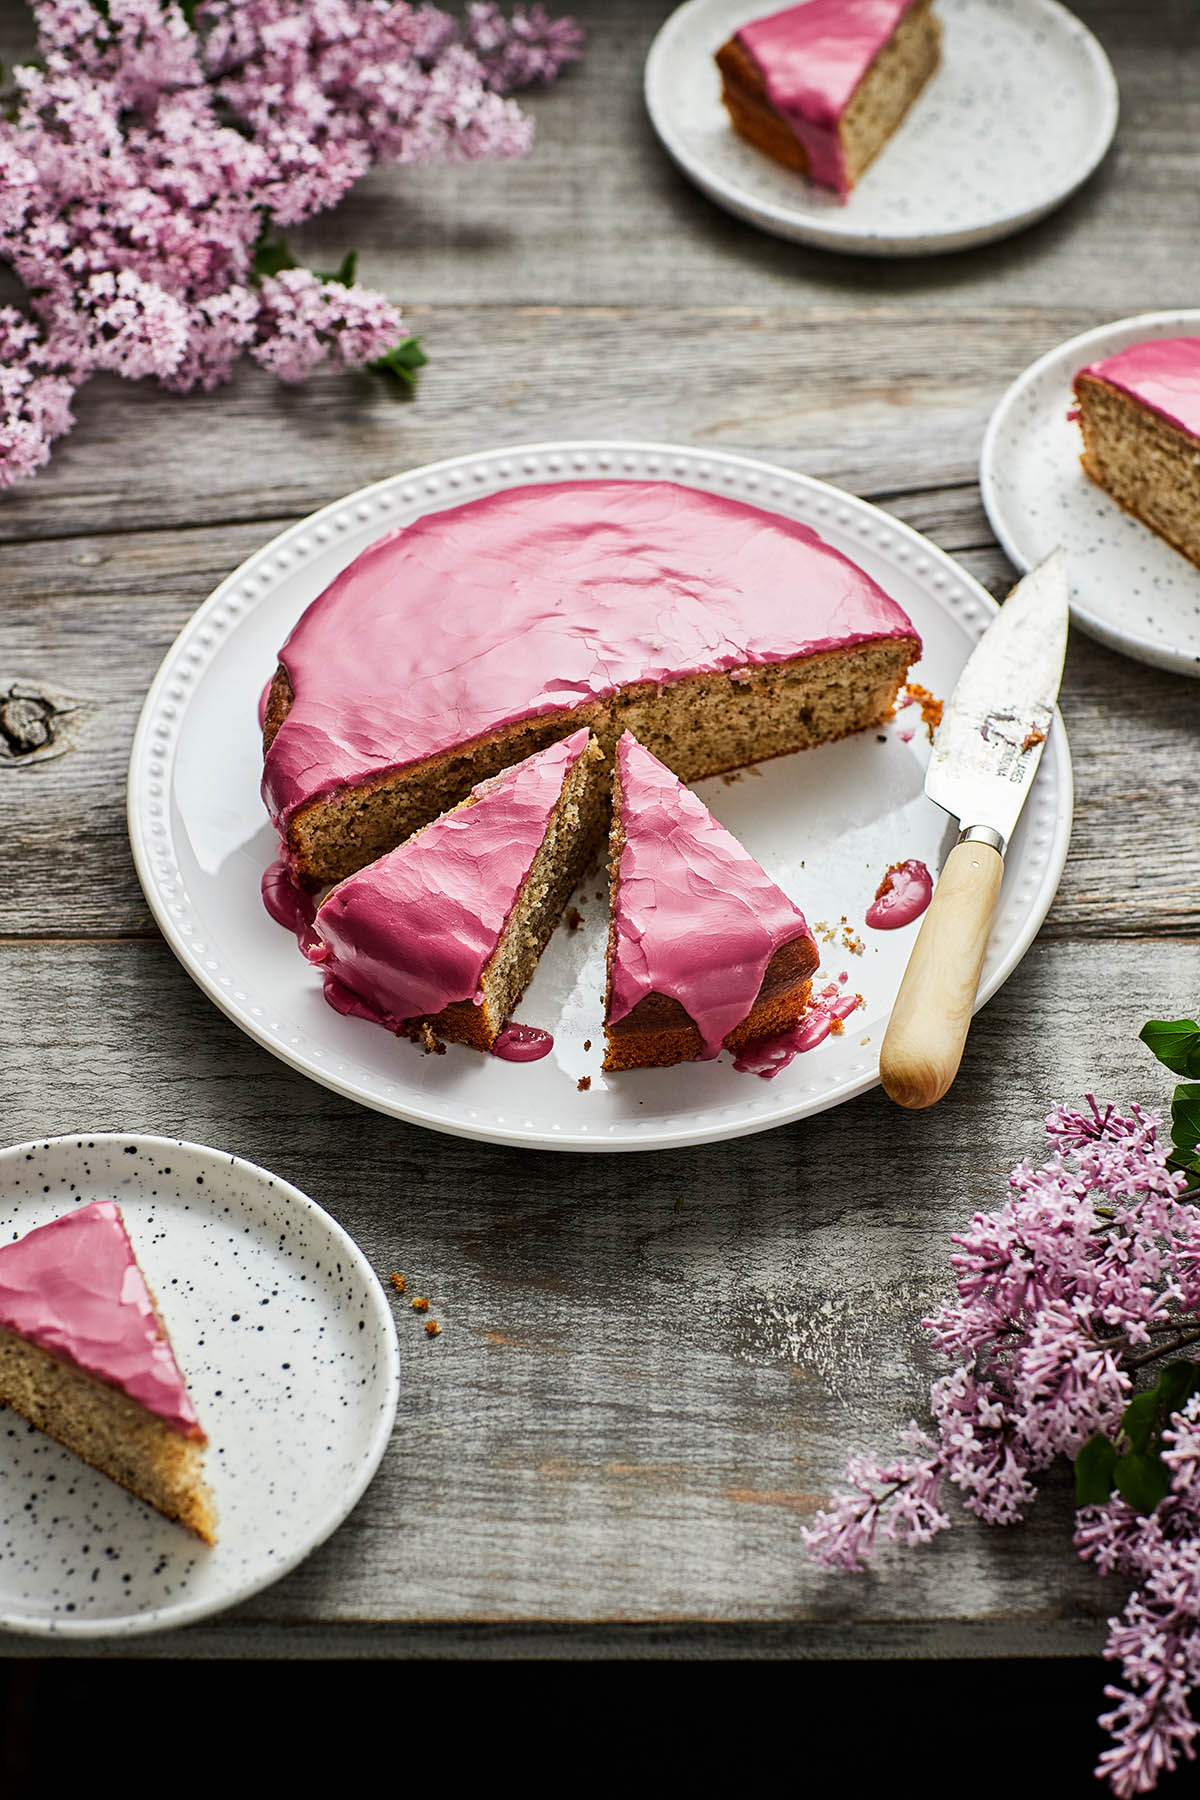 A sliced Earl Grey yogurt cake with pinkish-purple blackberry glaze on a grey weathered table. There are slices of cake on small playtes and lilacs on the table around the cake.